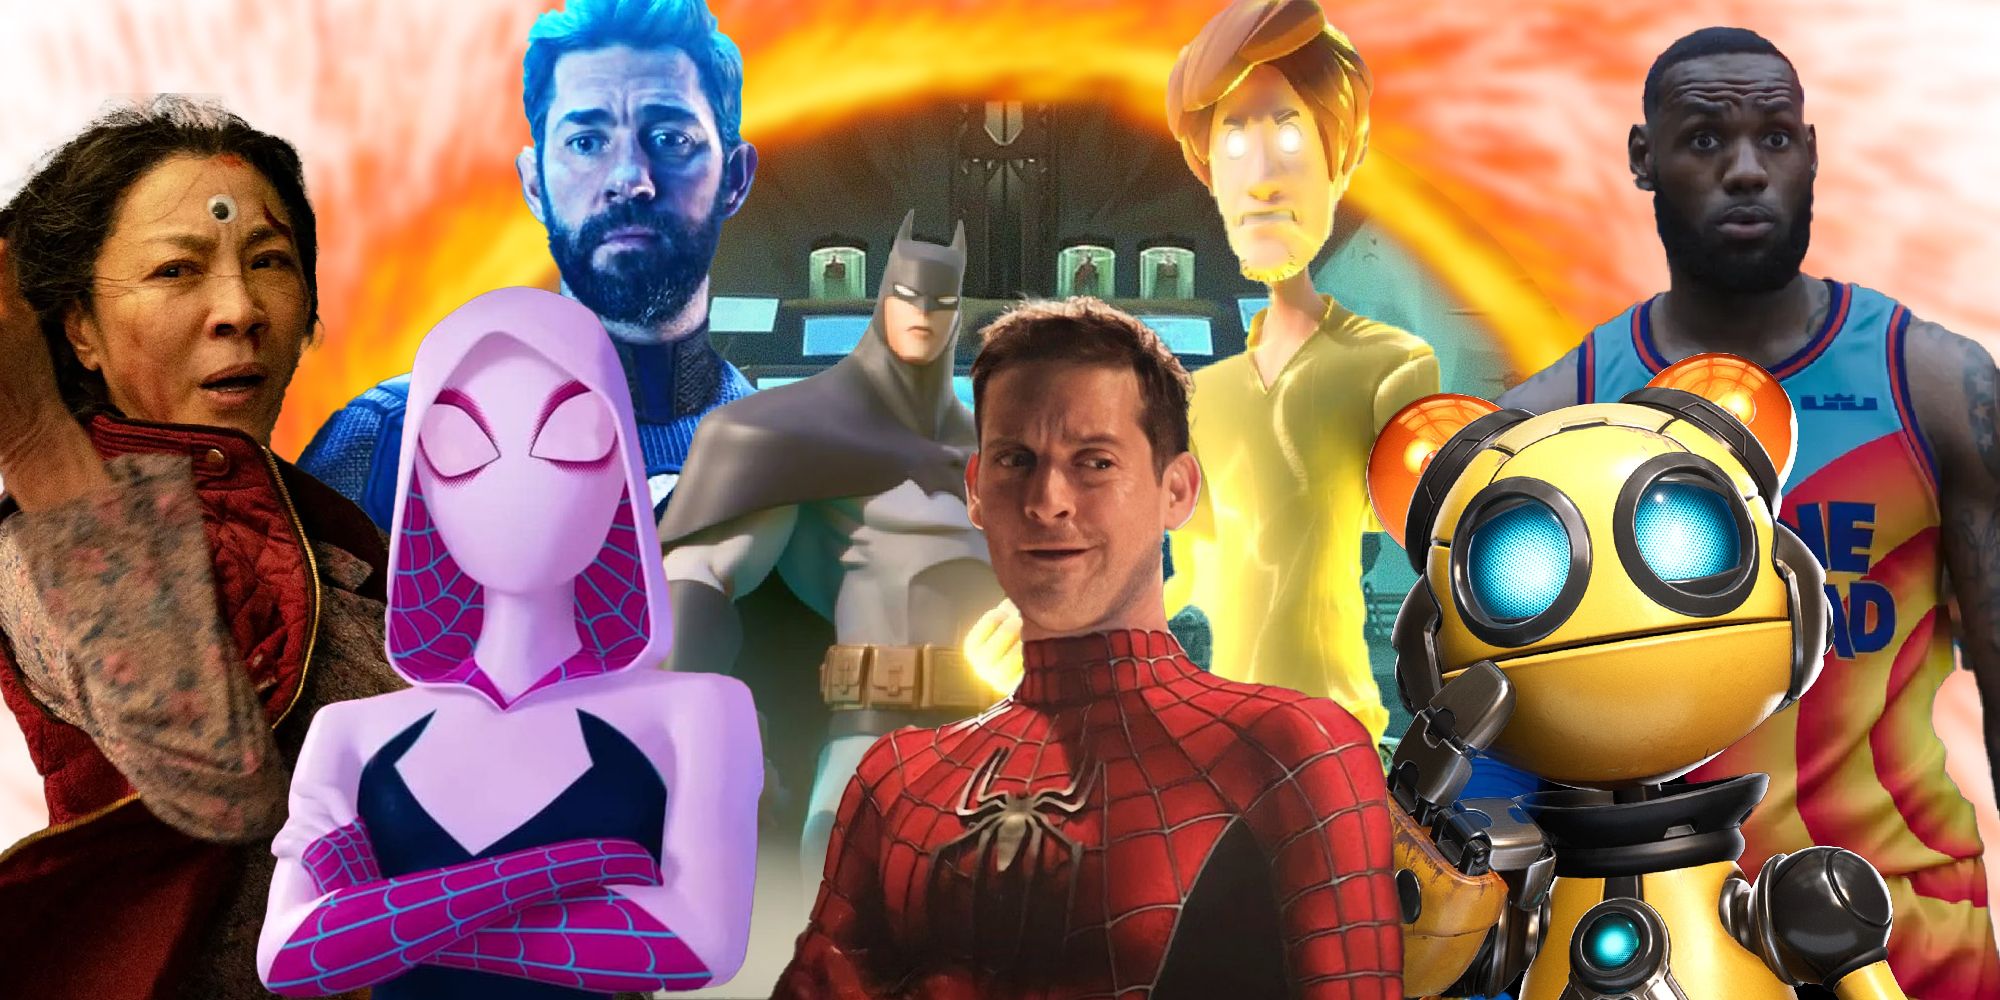 Michelle Yeoh in Everything Everywhere All At Once, Spider-Gwen in Spider-Man: Into The Spider-Verse, John Krasinski in Doctor Strange in the Multiverse of Madness, Batman and Shaggy in MultiVersus, Tobey Maguire in Spider-Man: No Way Home, Rivet in Ratchet & Clank: Rift Apart, and Lebron James in Space Jam: A New Legacy against the backdrop of an orange portal.